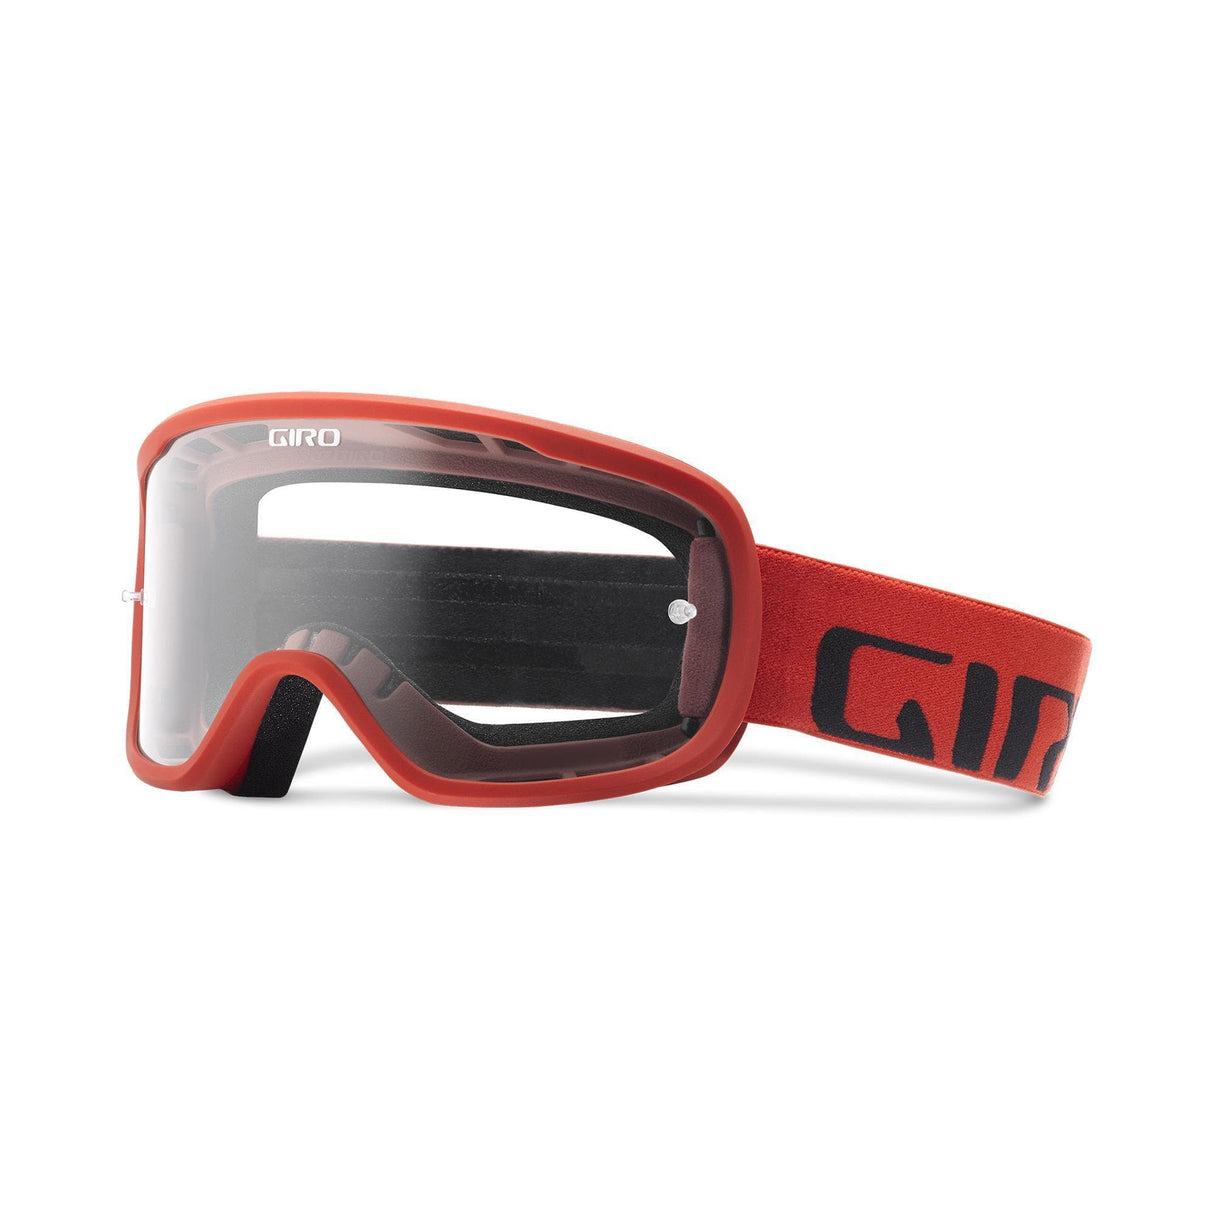 Giro Tempo Mtb Goggles 2019: Red Adult